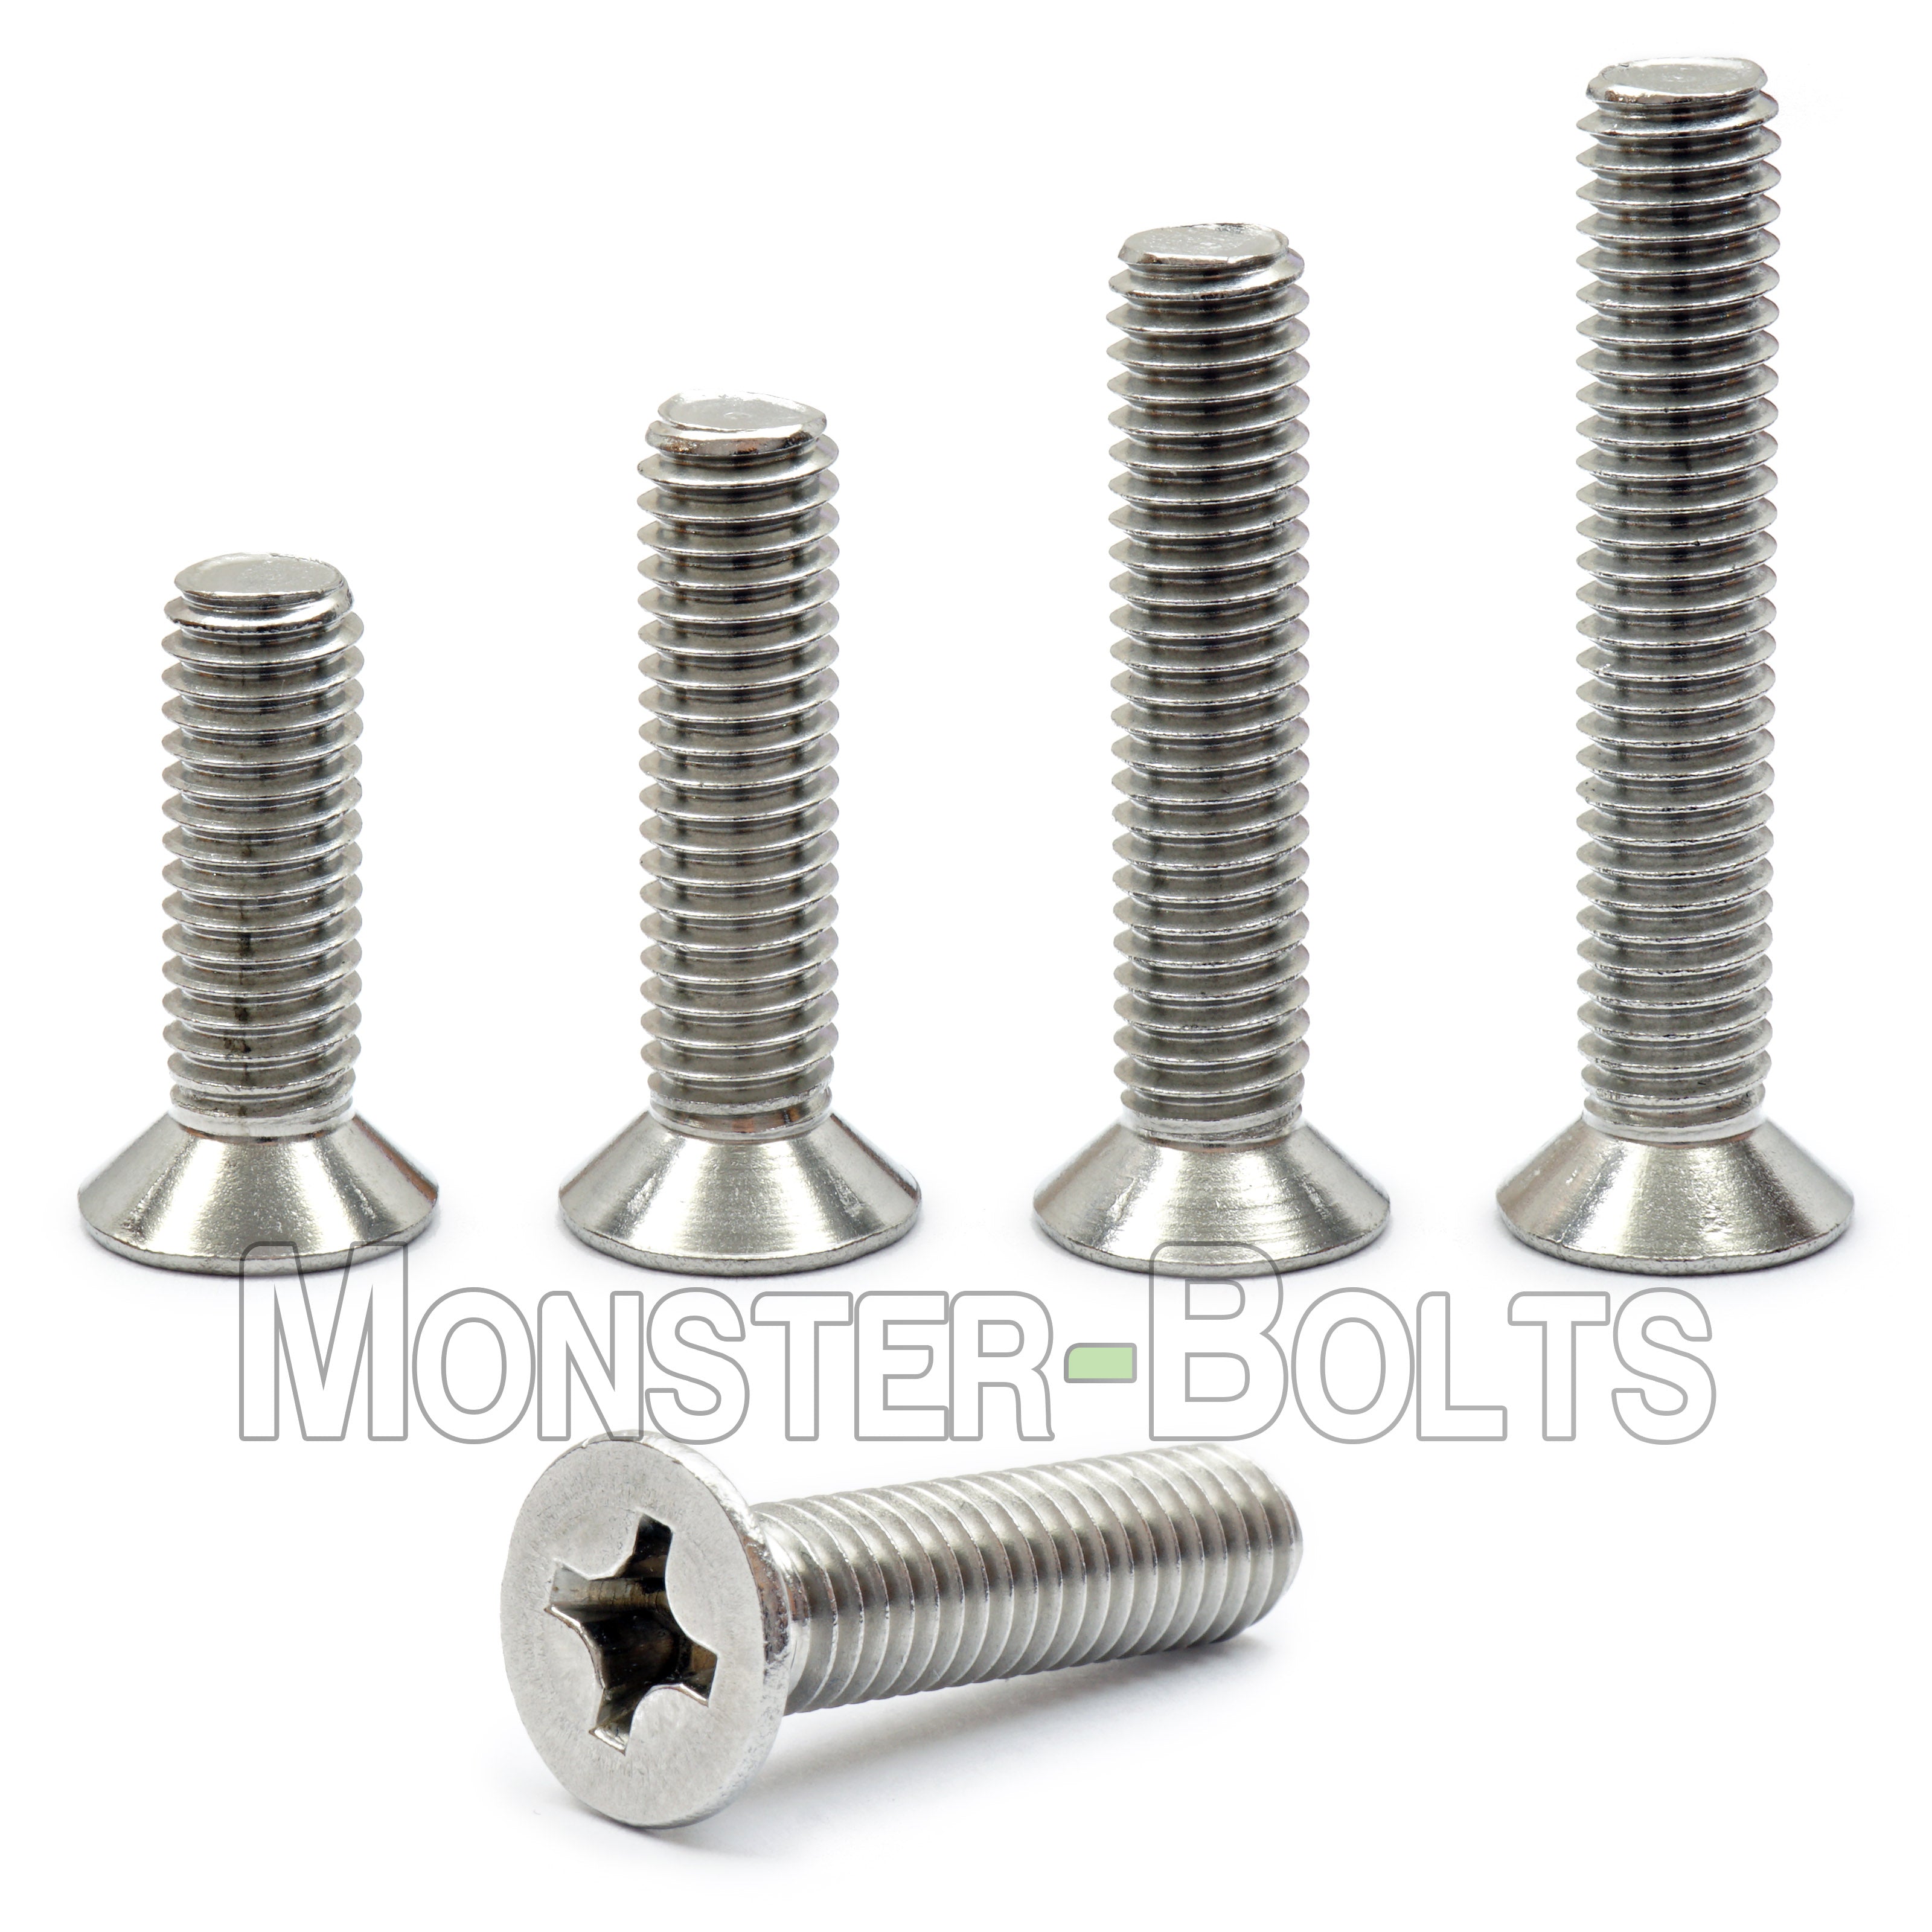 Details about   304 Stainless Steel Phillips Countersunk Flat Head Machine Screw M3 M4 M5 